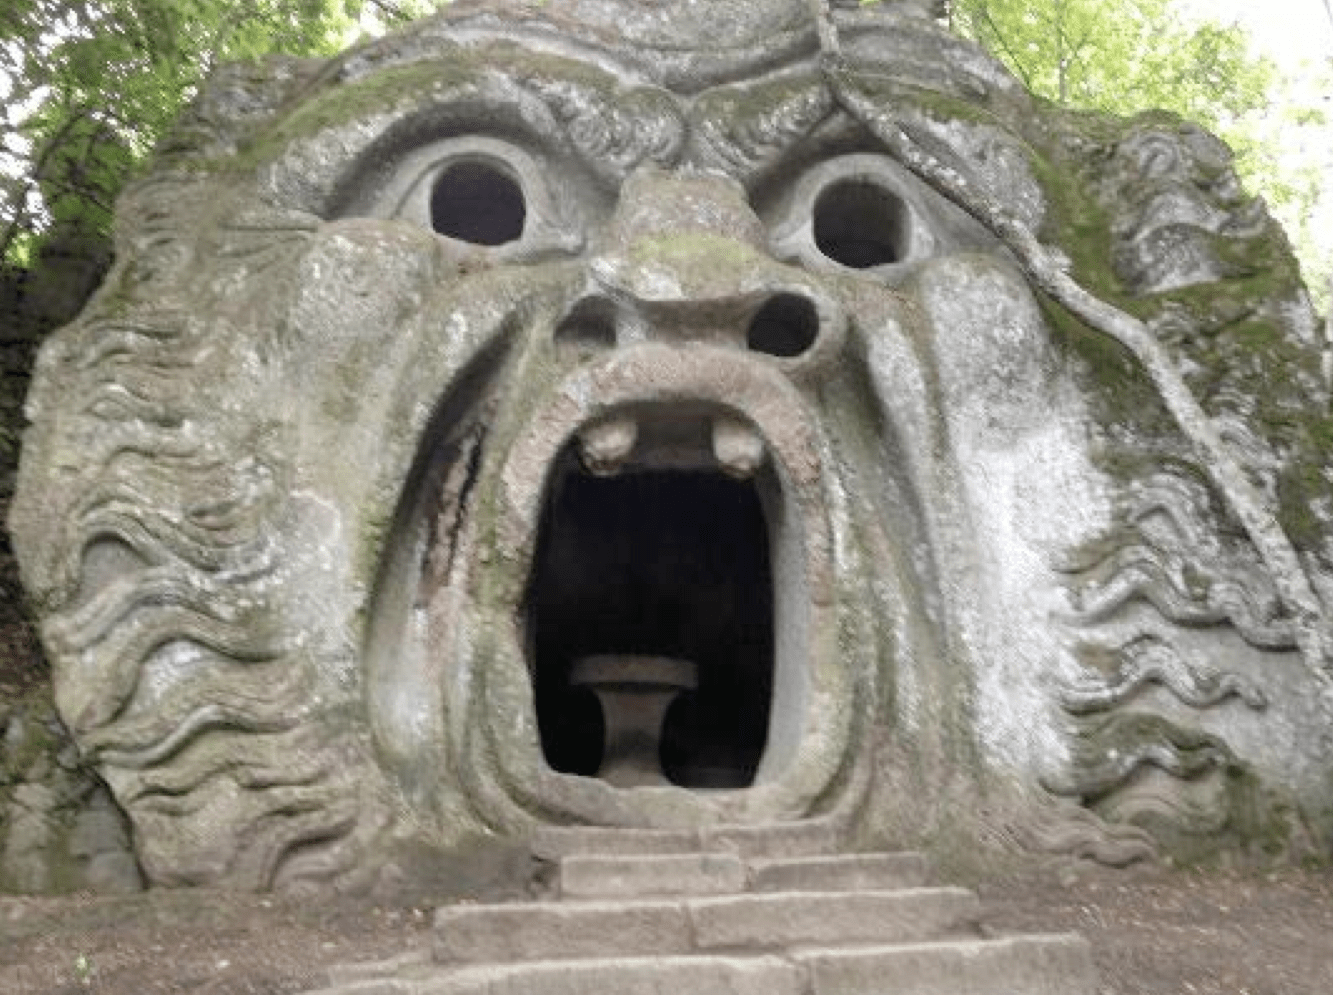 BOMARZO AND ITS MONSTERS